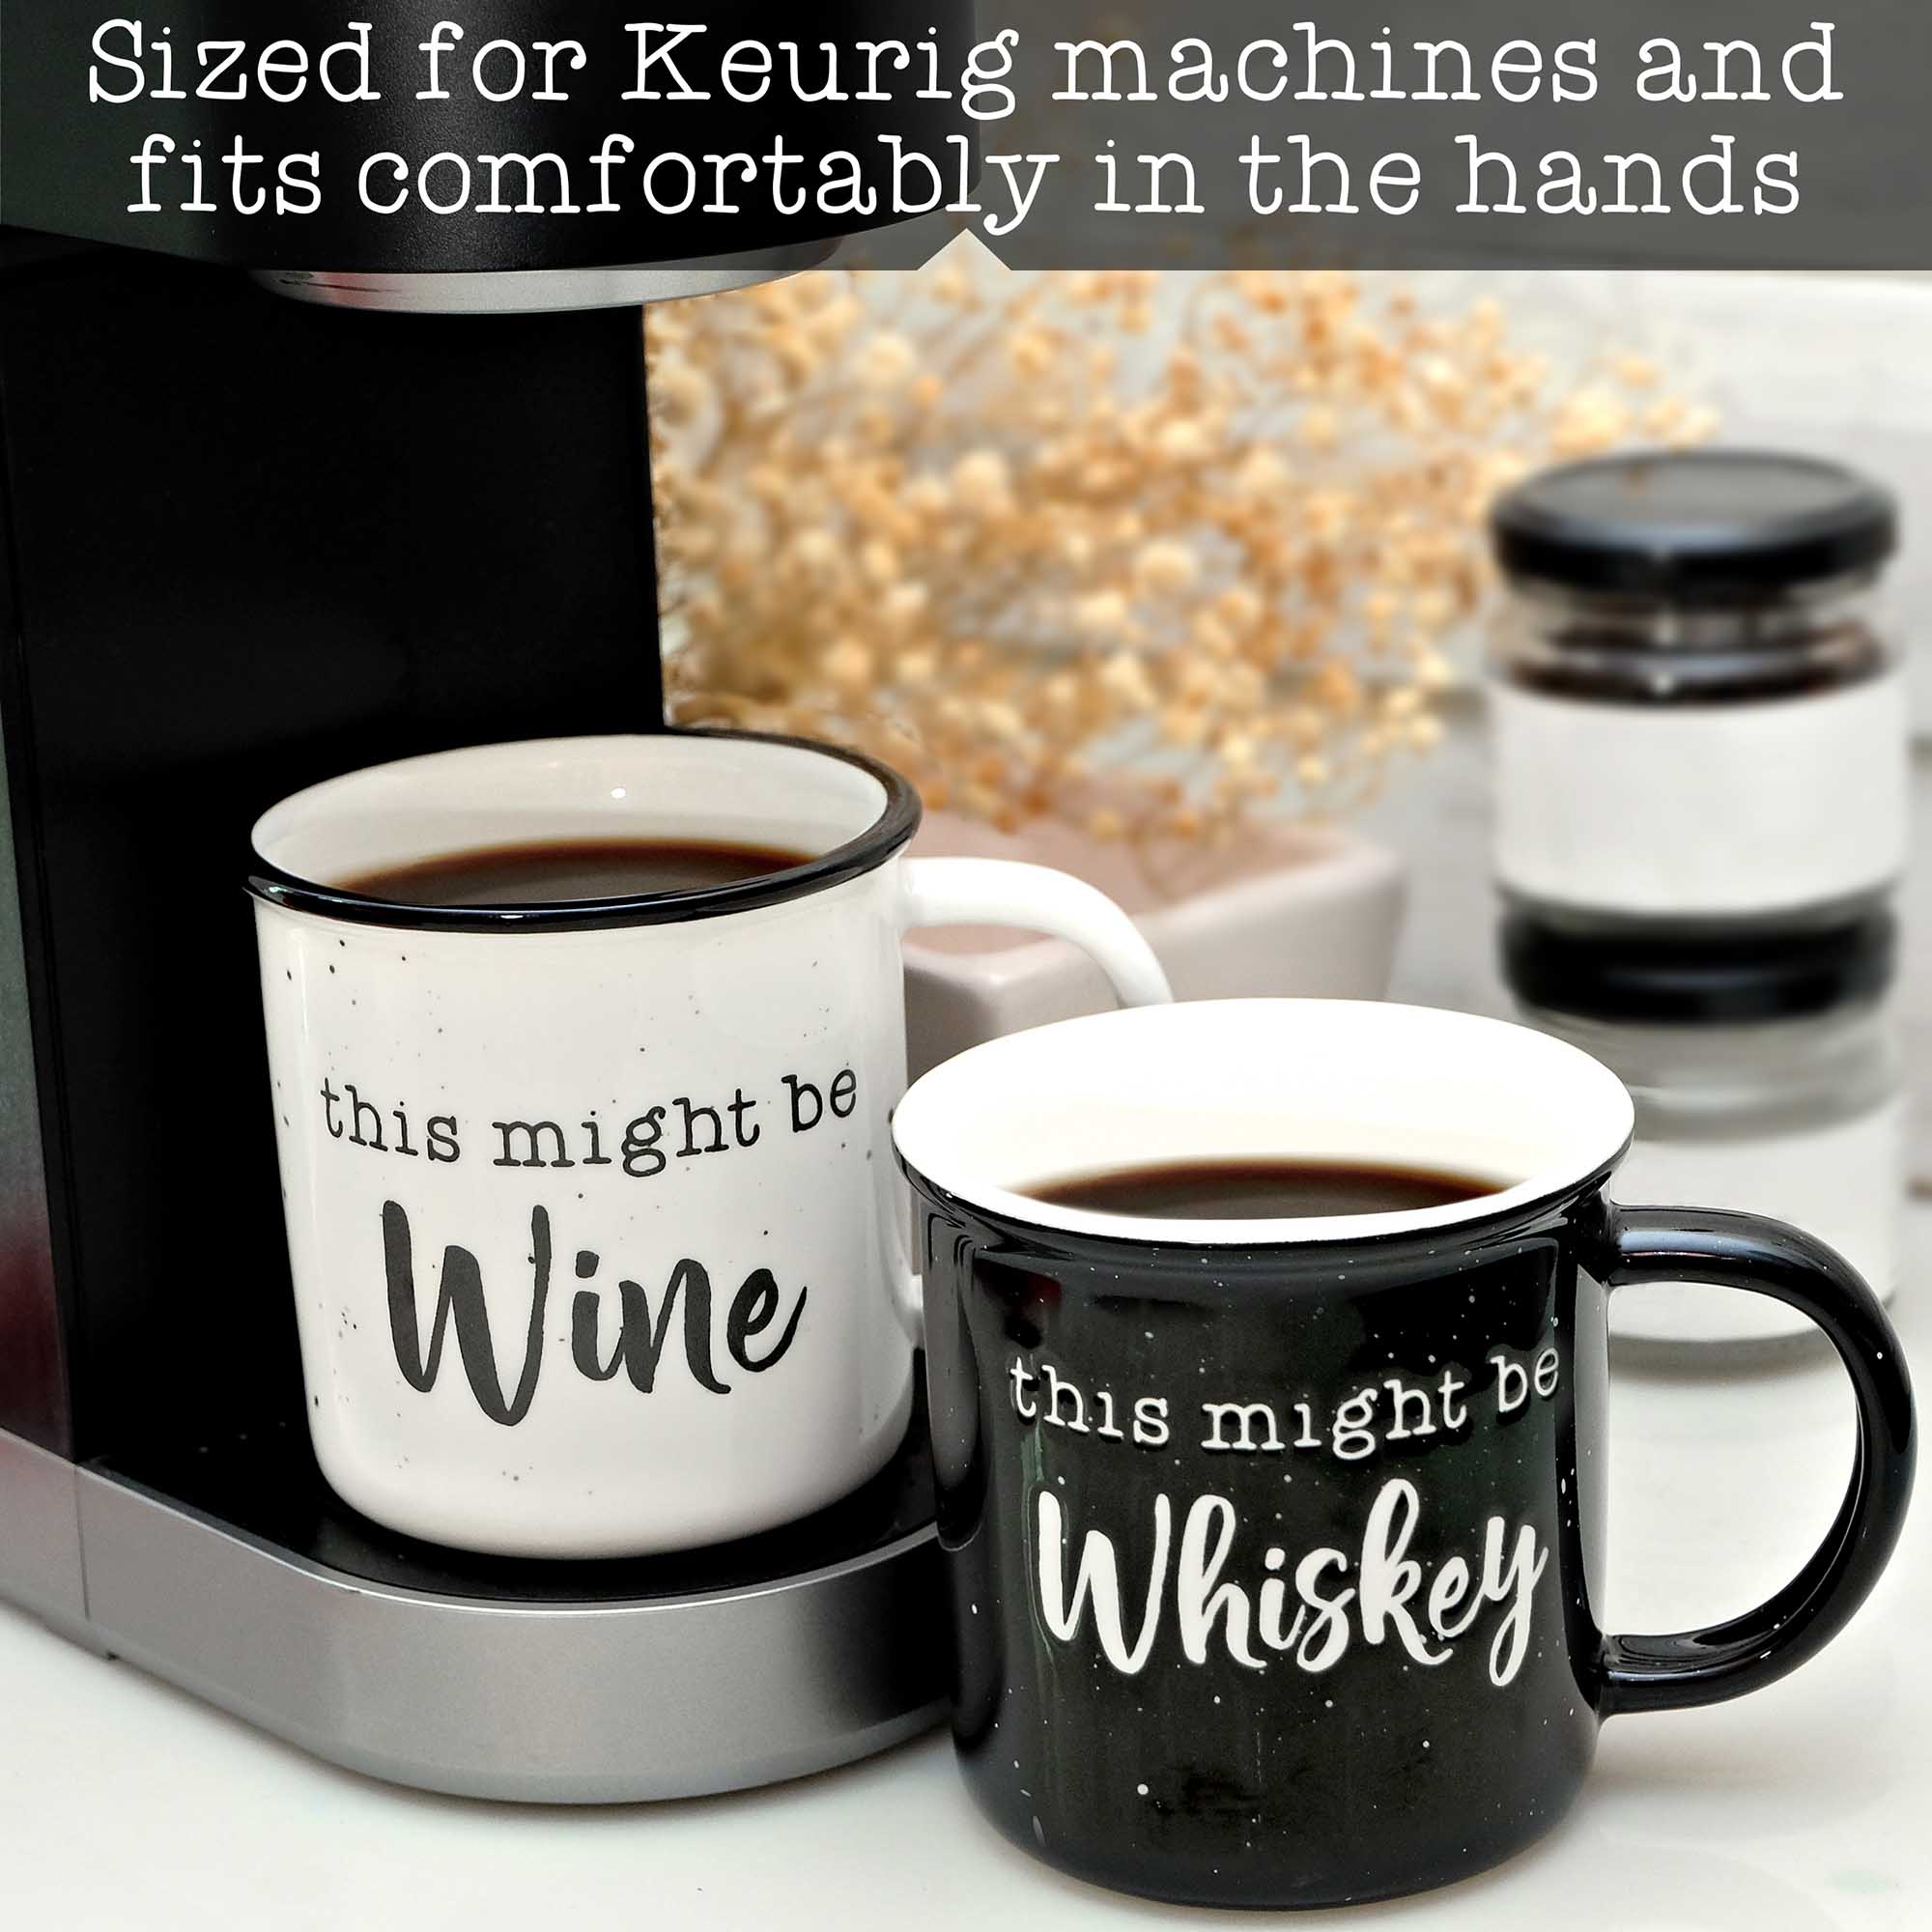 https://maineventusa.shop/cdn/shop/products/Mugs_greytext_might_coffeemaker_this-might-be-whiskey-this-might-be-wine-mugs-set-of-2-couples-coffee-mugs-set-quote-funny-gift-set-matching-ceramic.jpg?v=1678800214